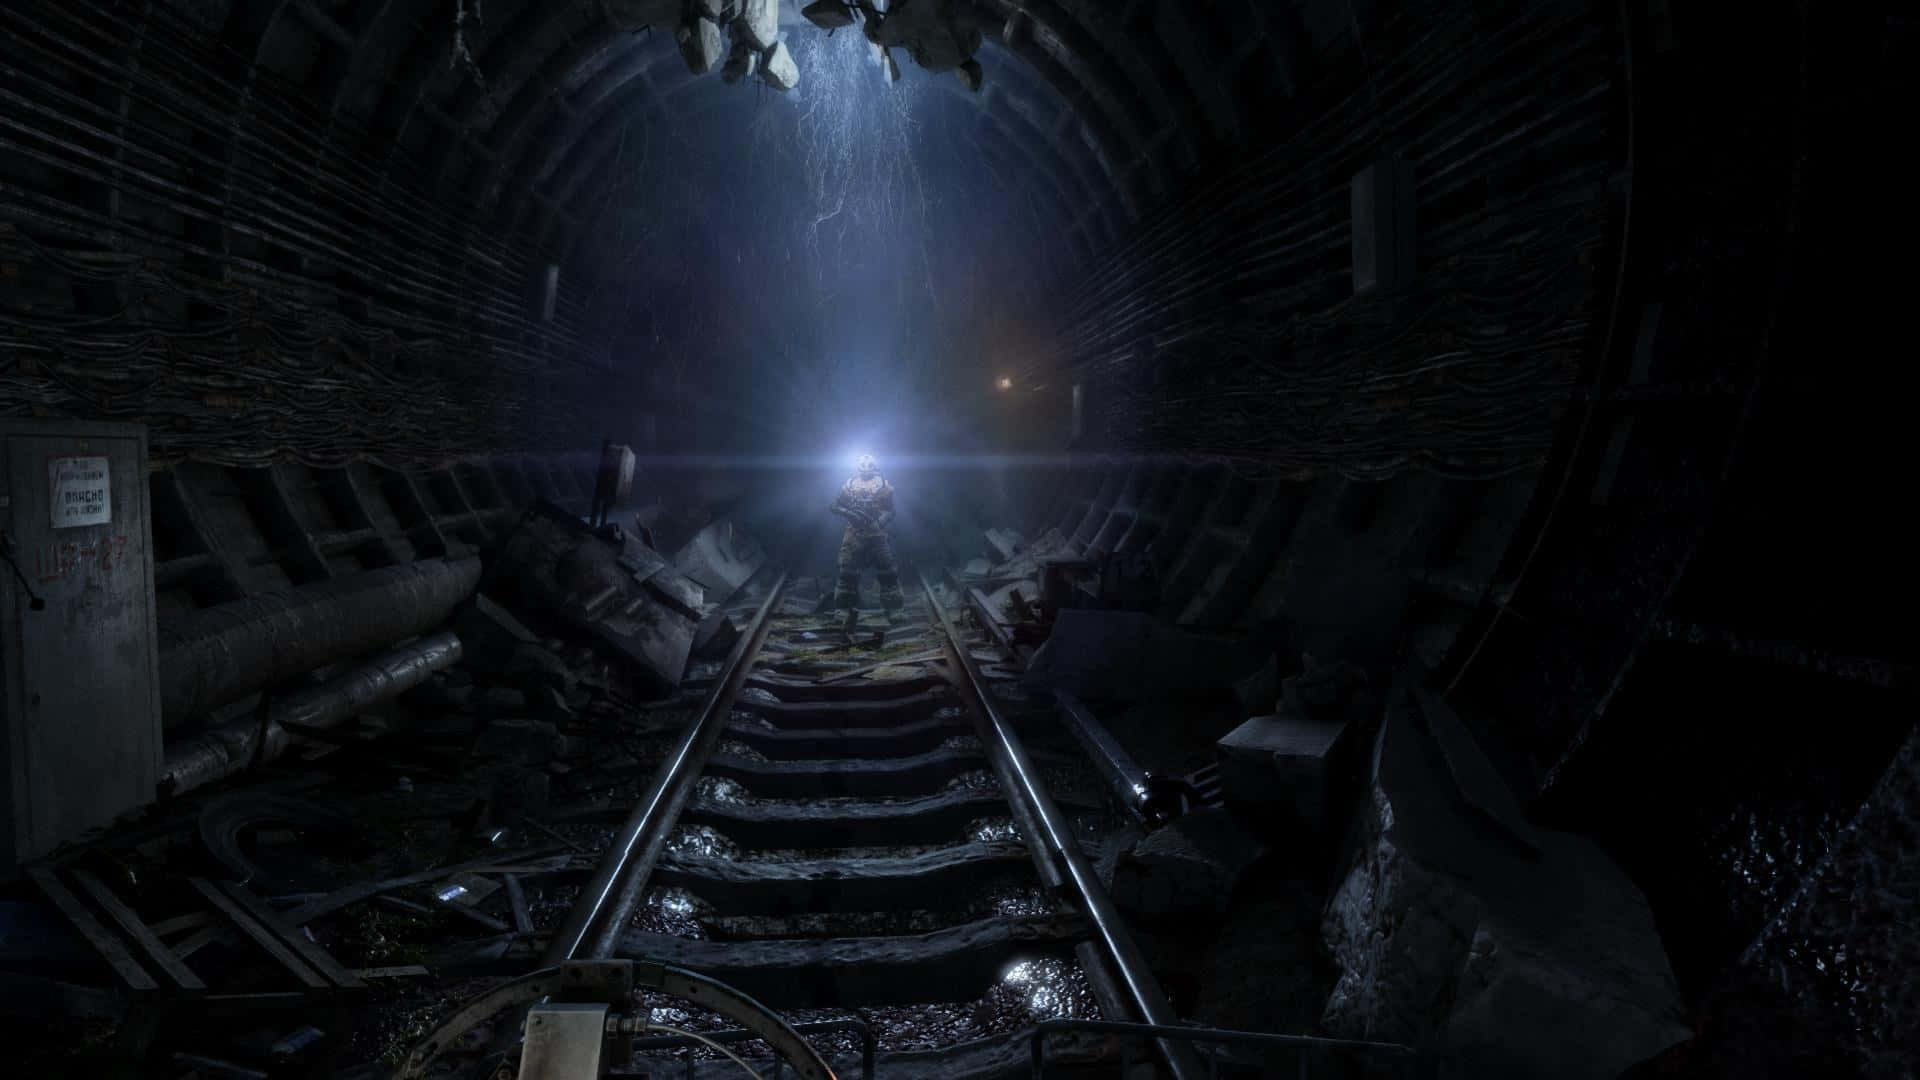 A Train Is Going Through A Tunnel With A Light Shining On It